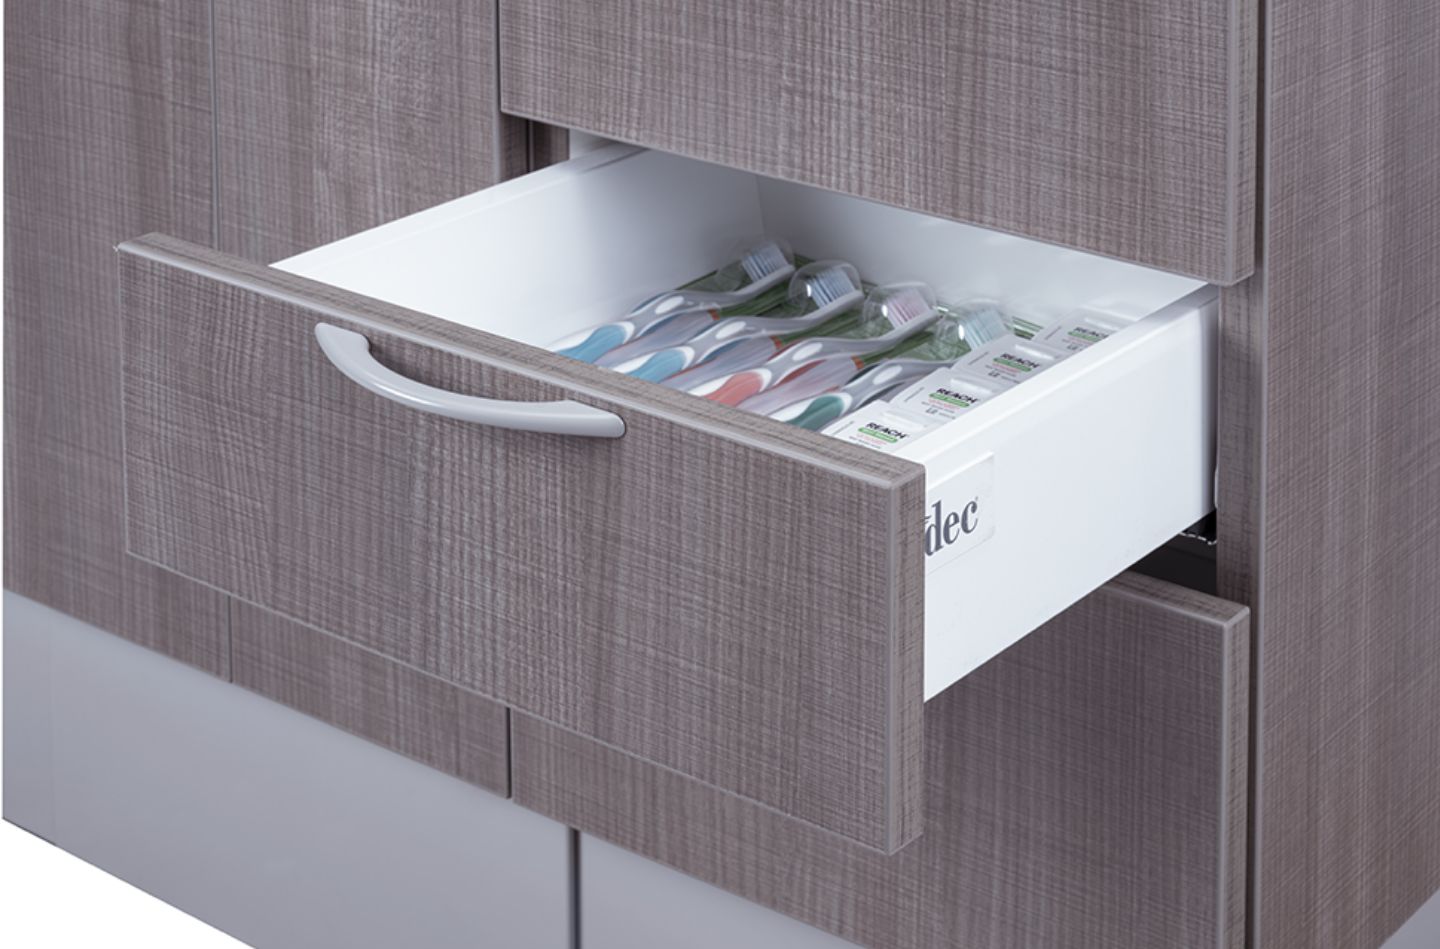 A-dec Inspire 391 hygiene console lower pull-out drawer